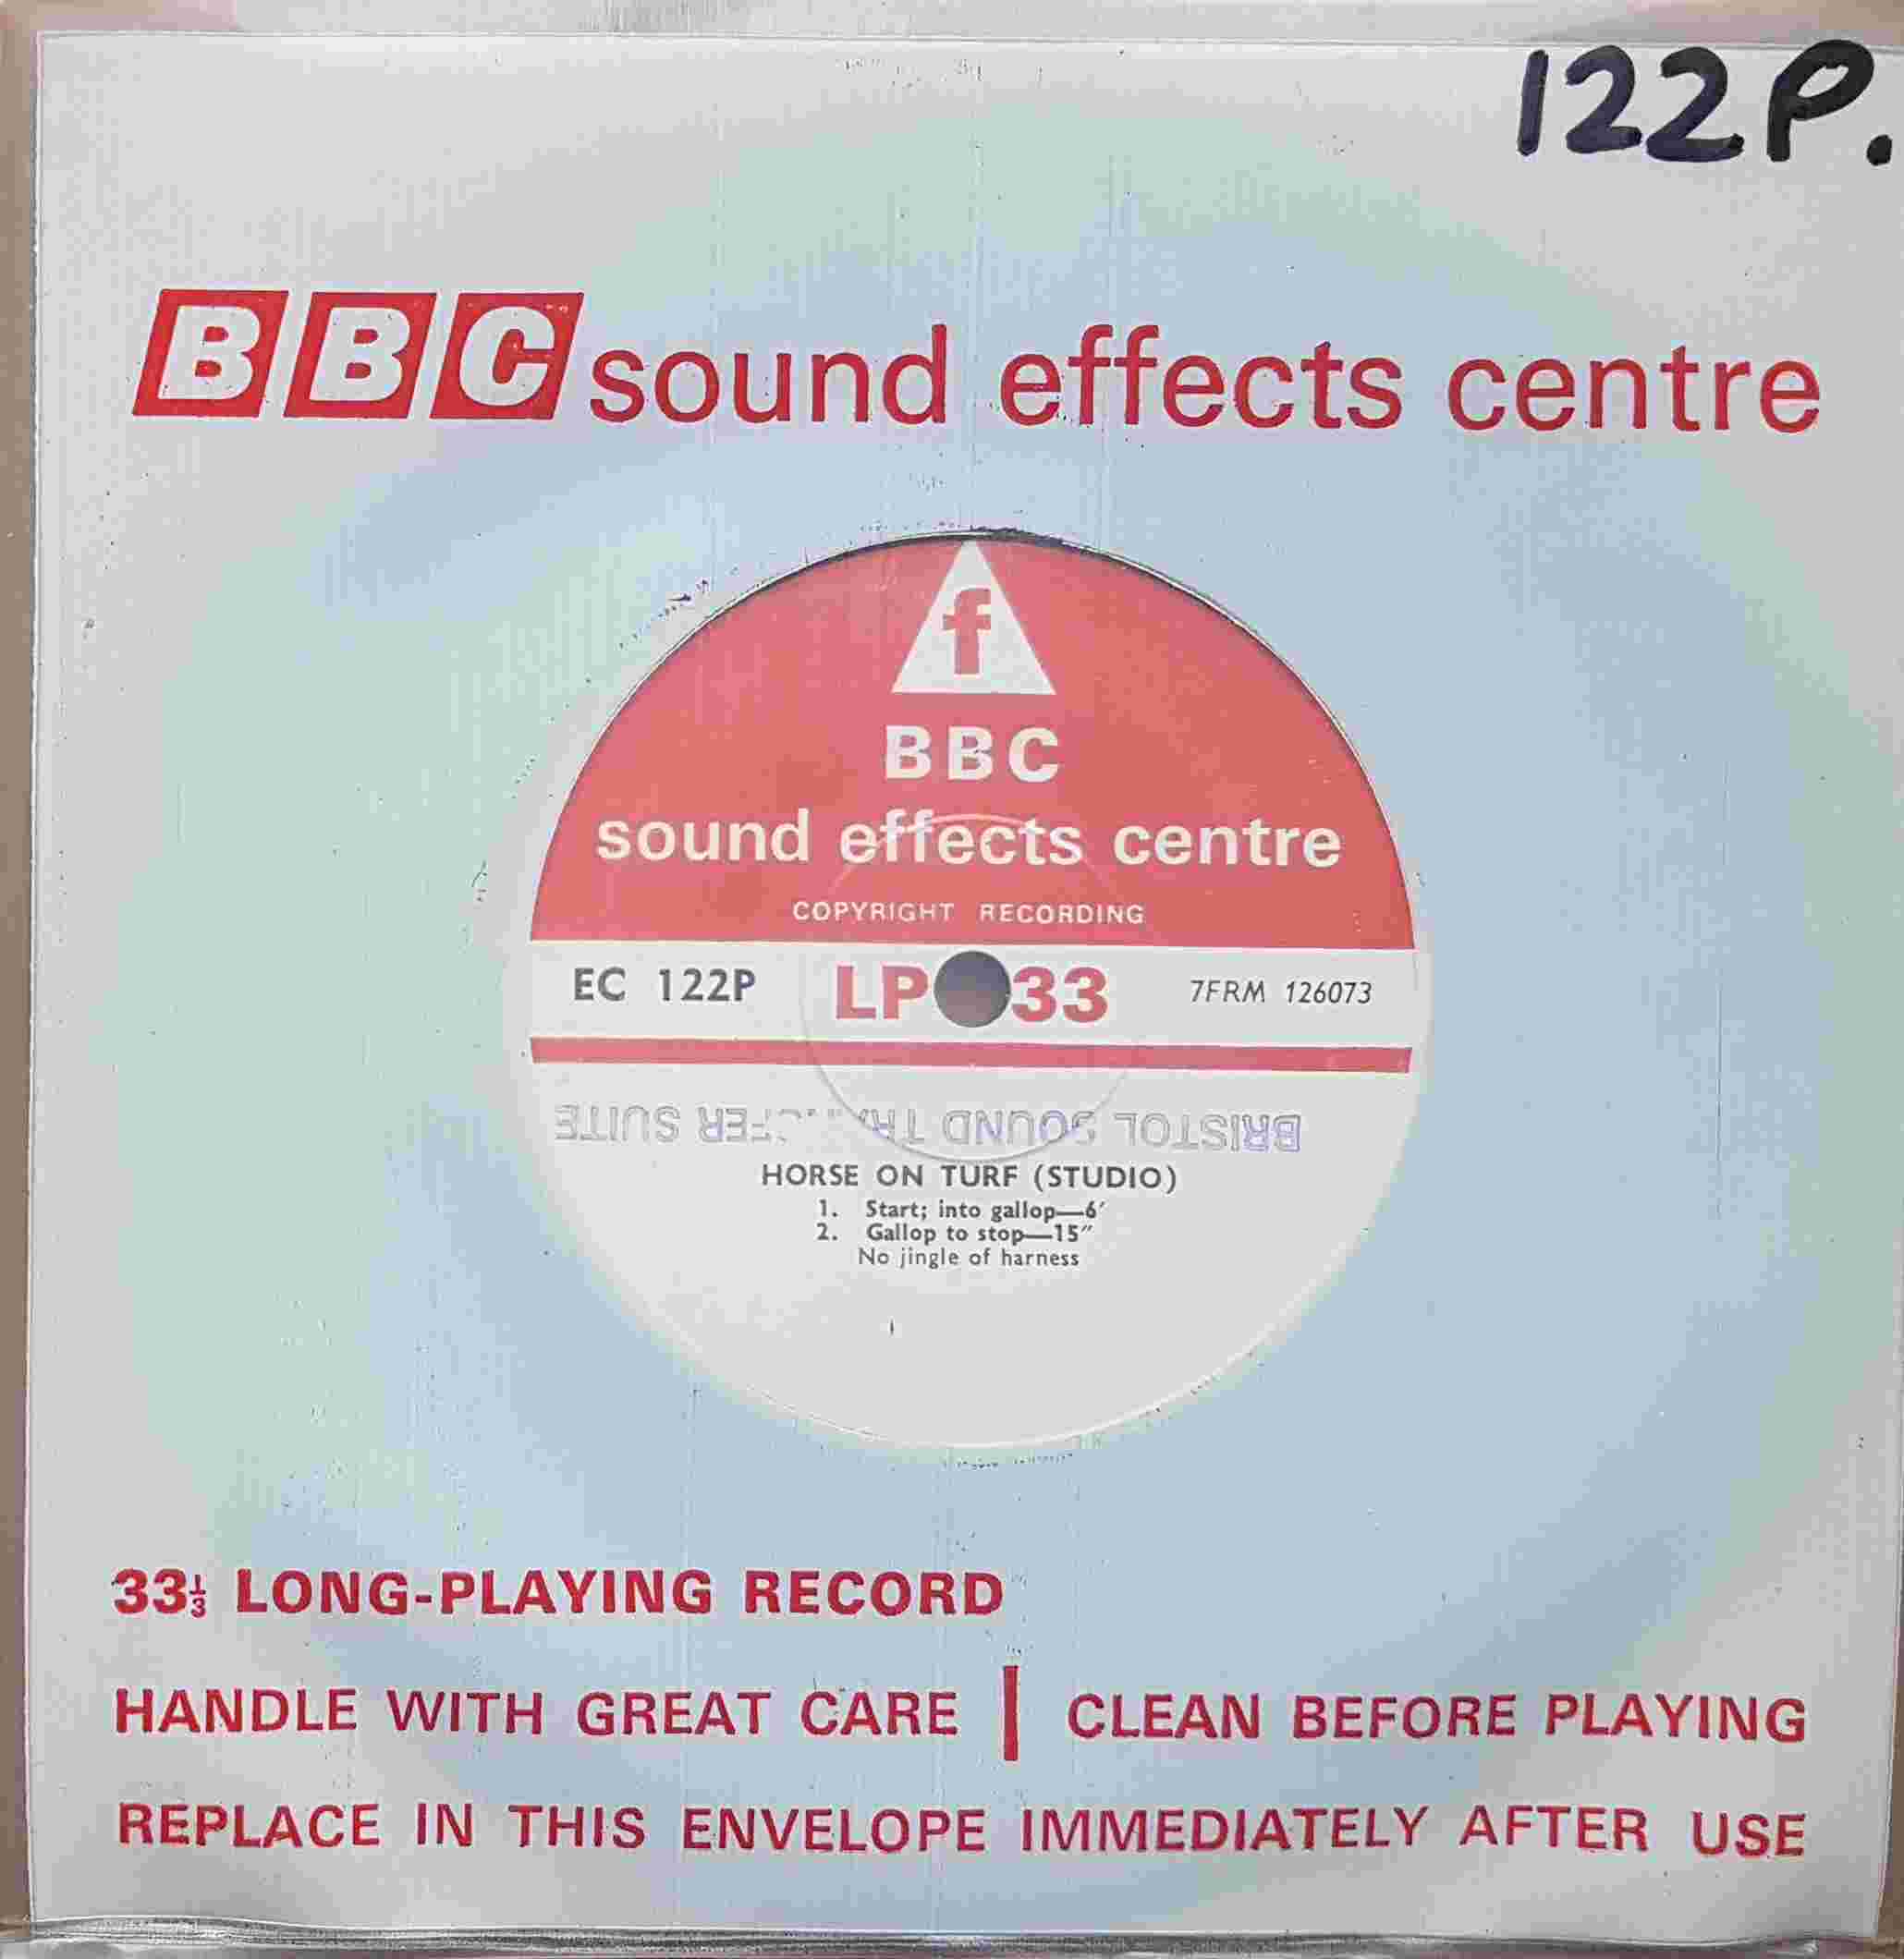 Picture of EC 122P Horse on turf (Studio) by artist Not registered from the BBC records and Tapes library